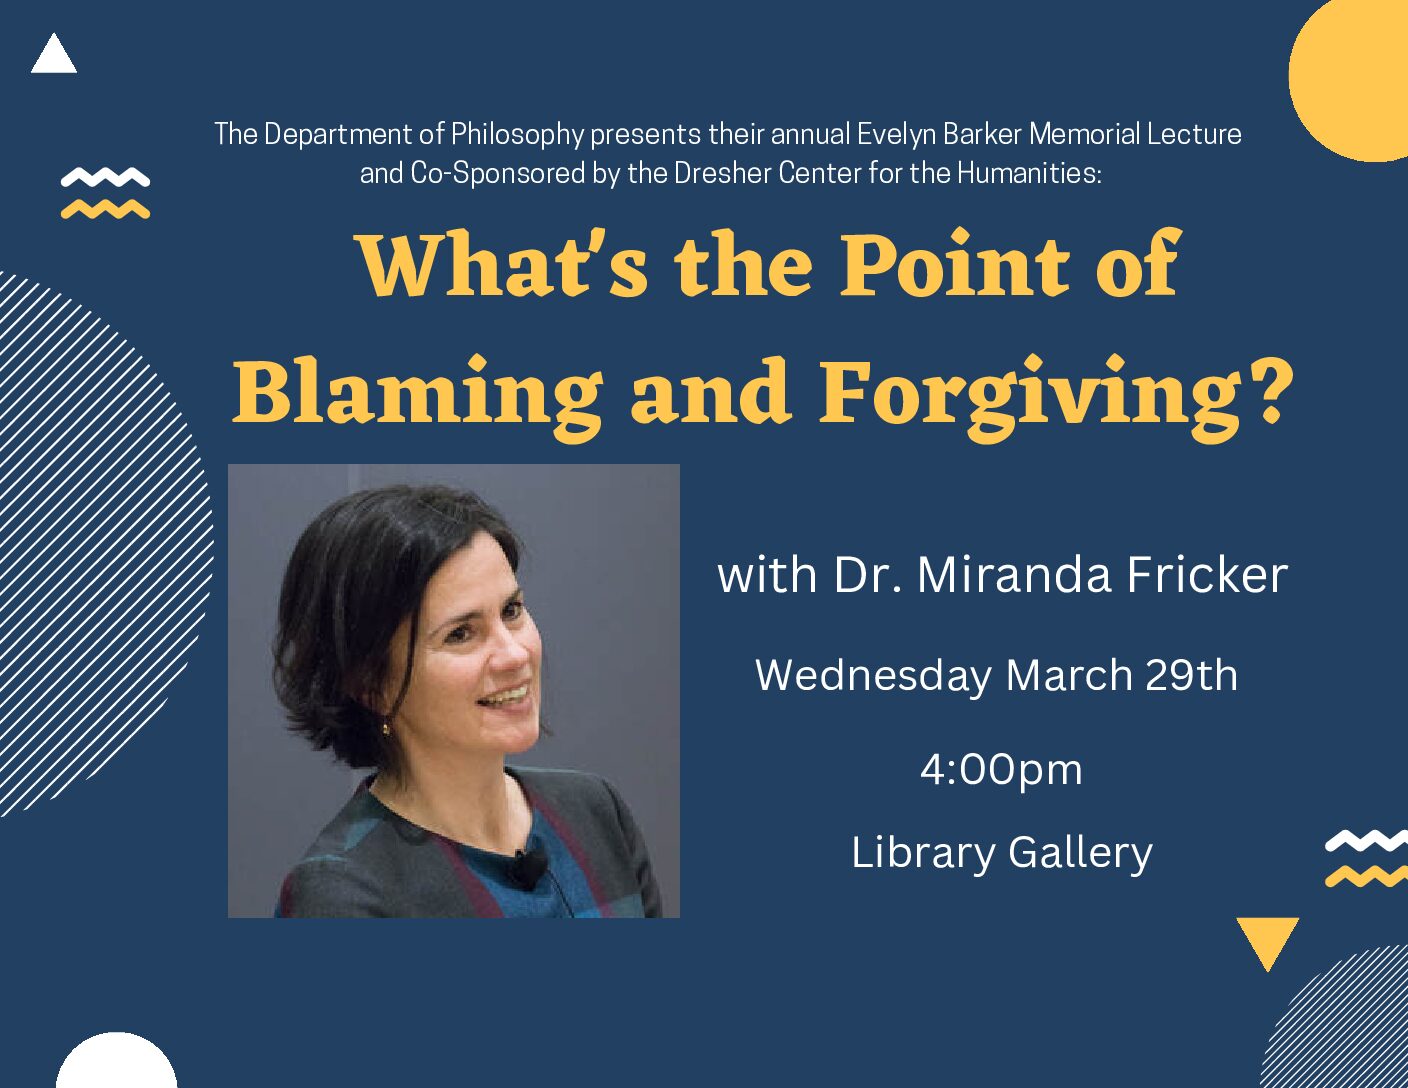 Evelyn Barker Memorial Lecture with Miranda Fricker